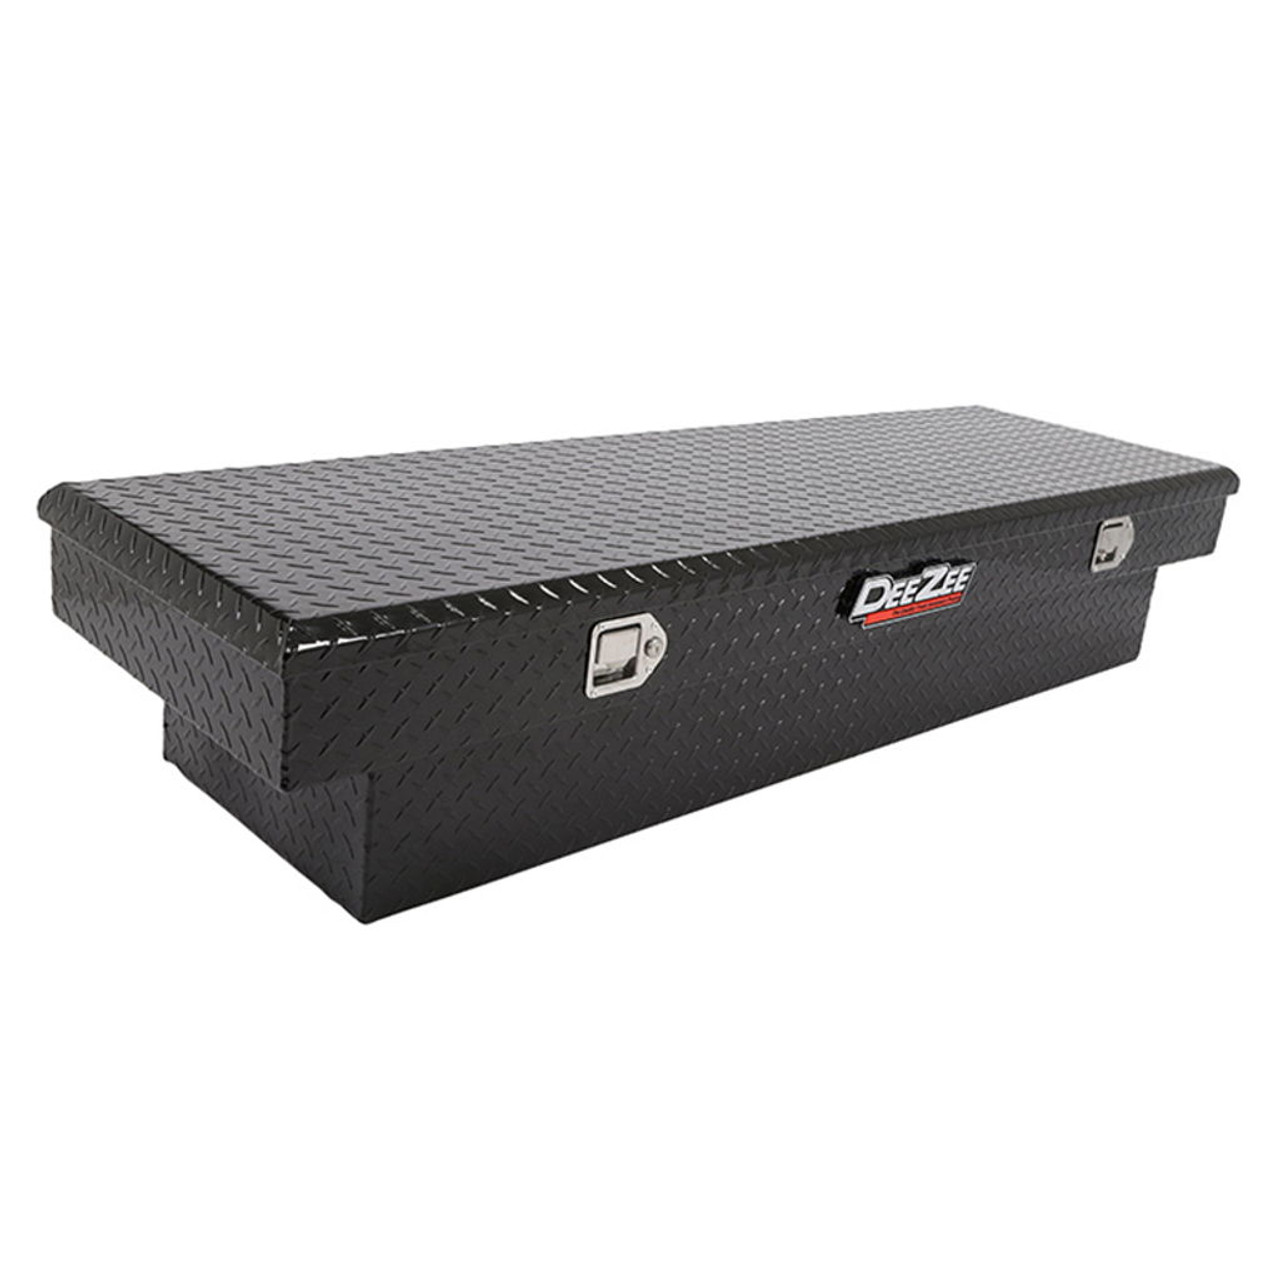 Dee Zee Tool Box Mat at Tractor Supply Co.